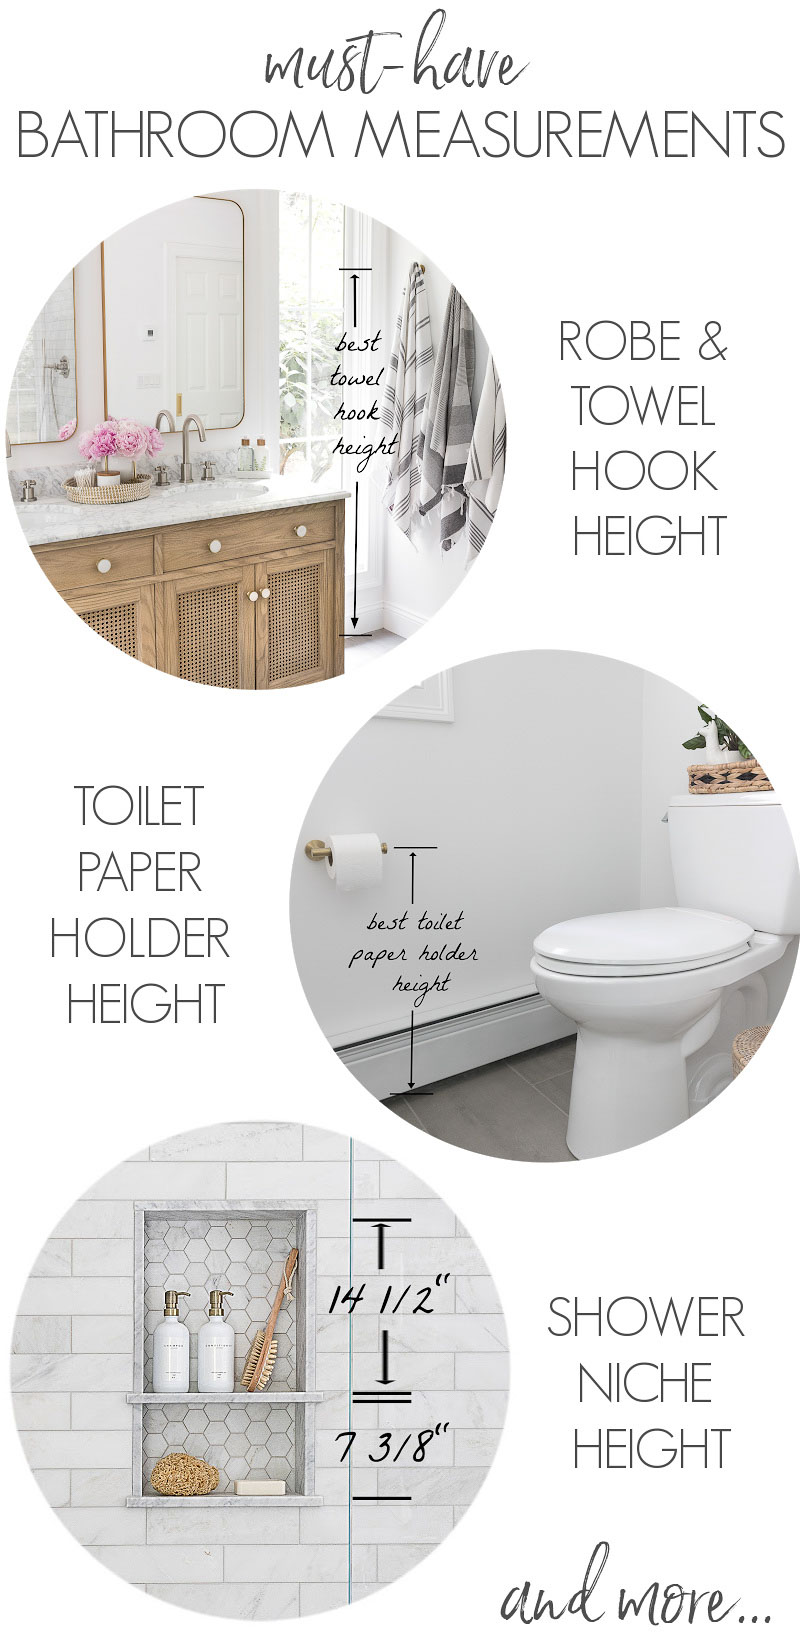 All the bathroom measurements you need to know! Toilet paper holder height, towel bar height, robe hook height & more!